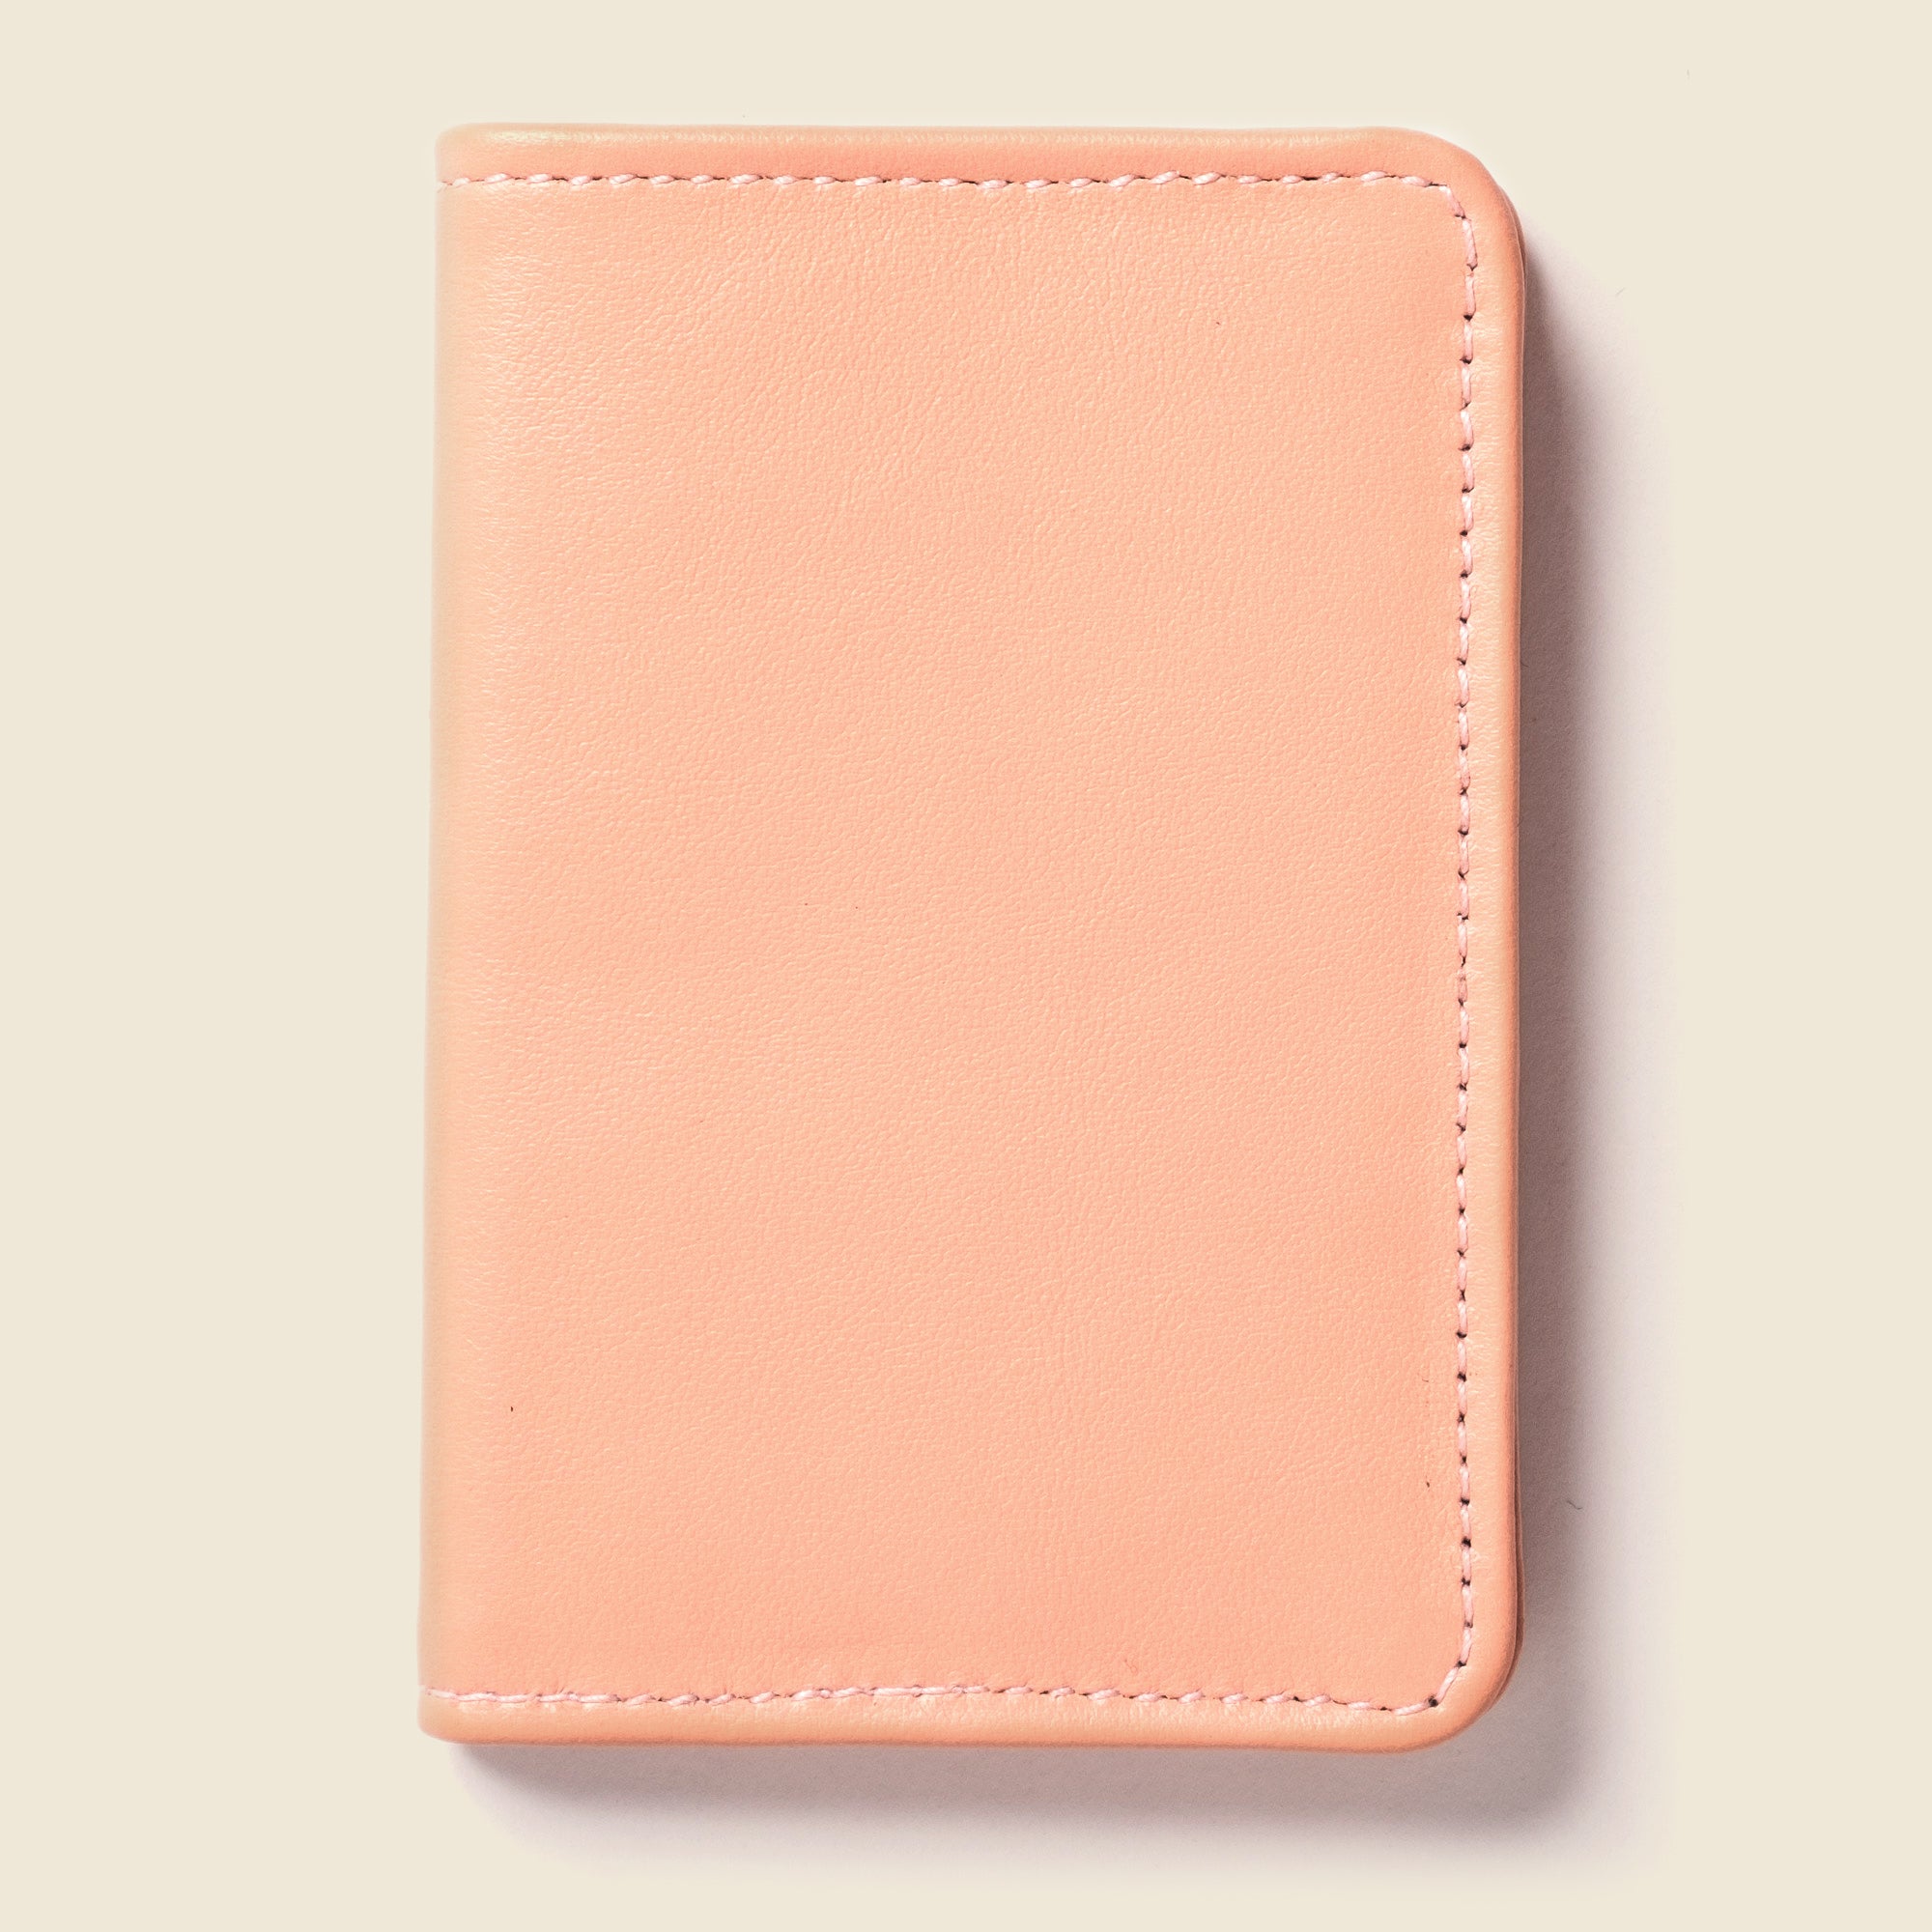 Pastel pink leather bifold wallet for women